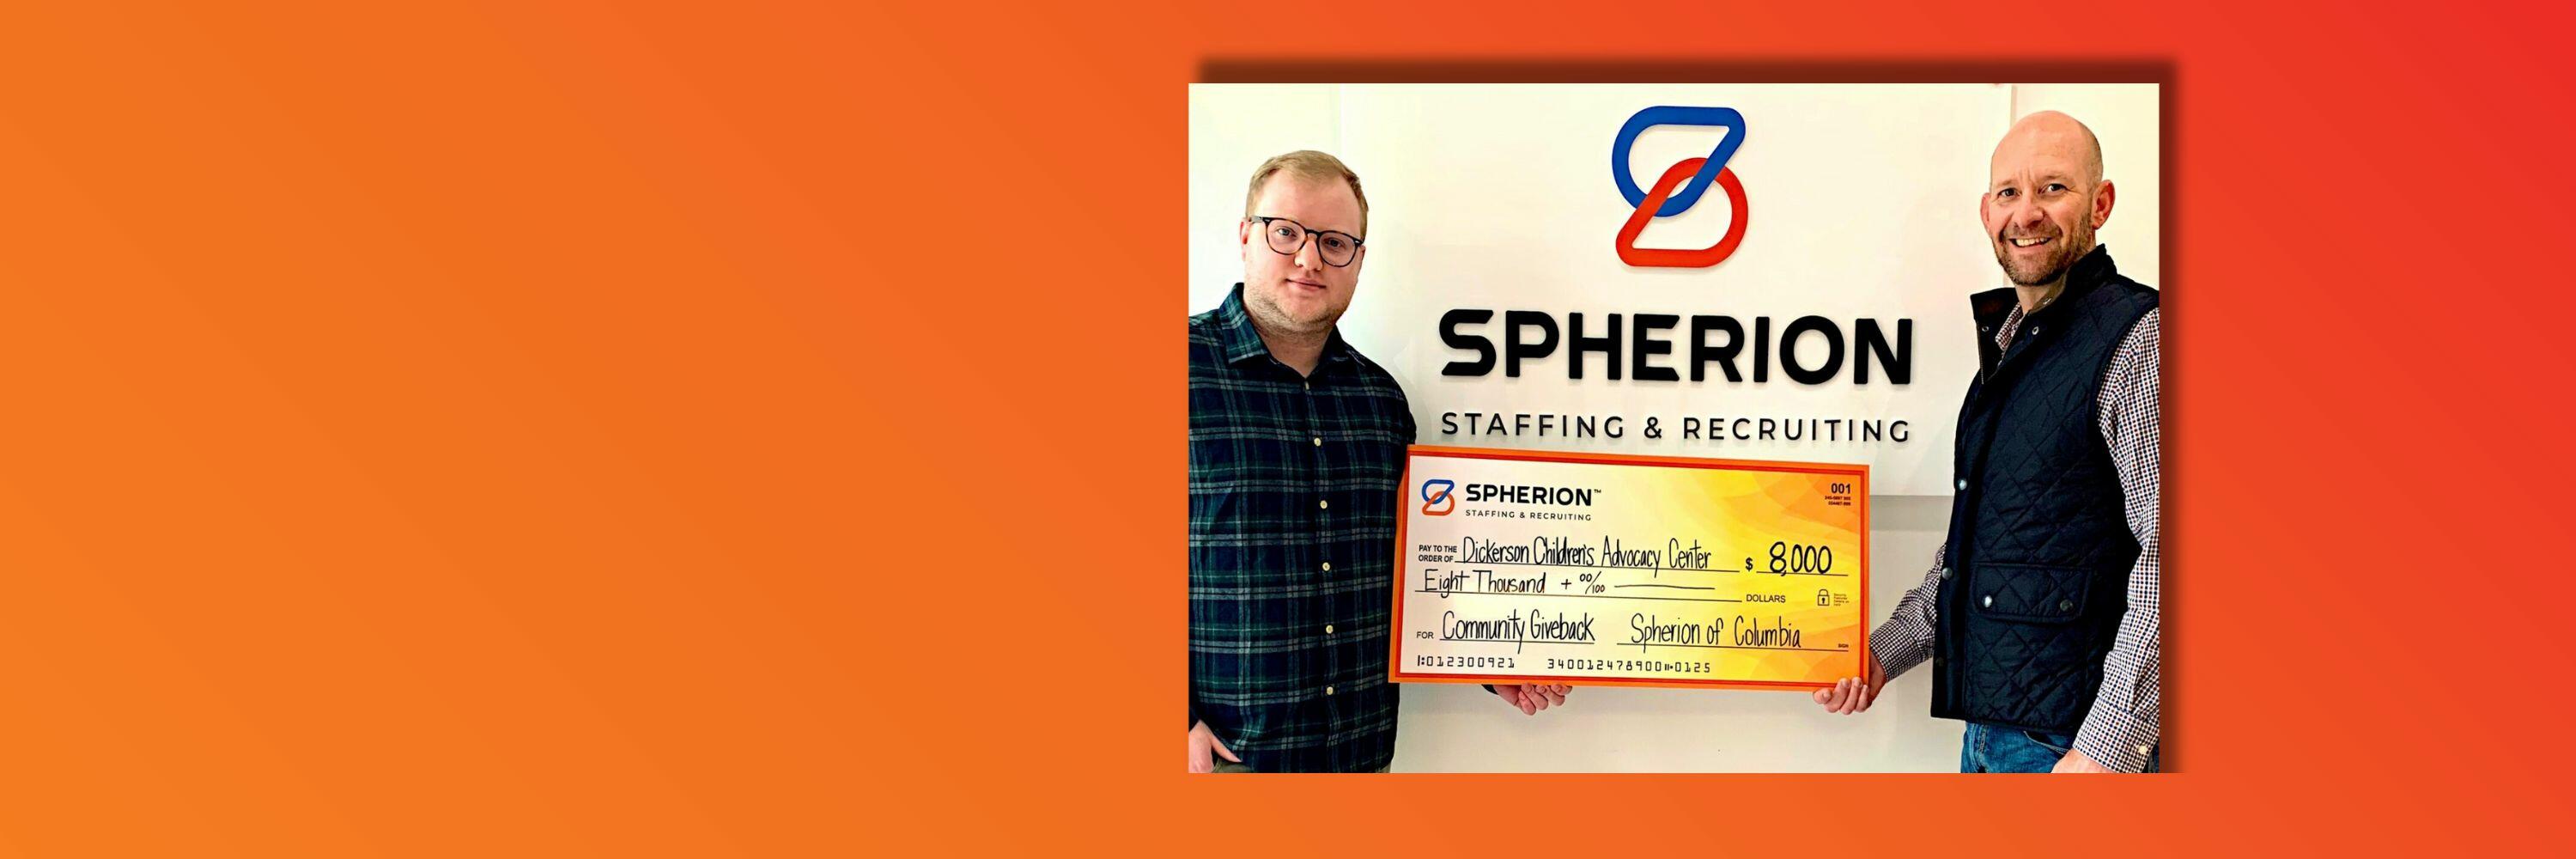 Orange background with a photo of two men smiling and holding a giant check